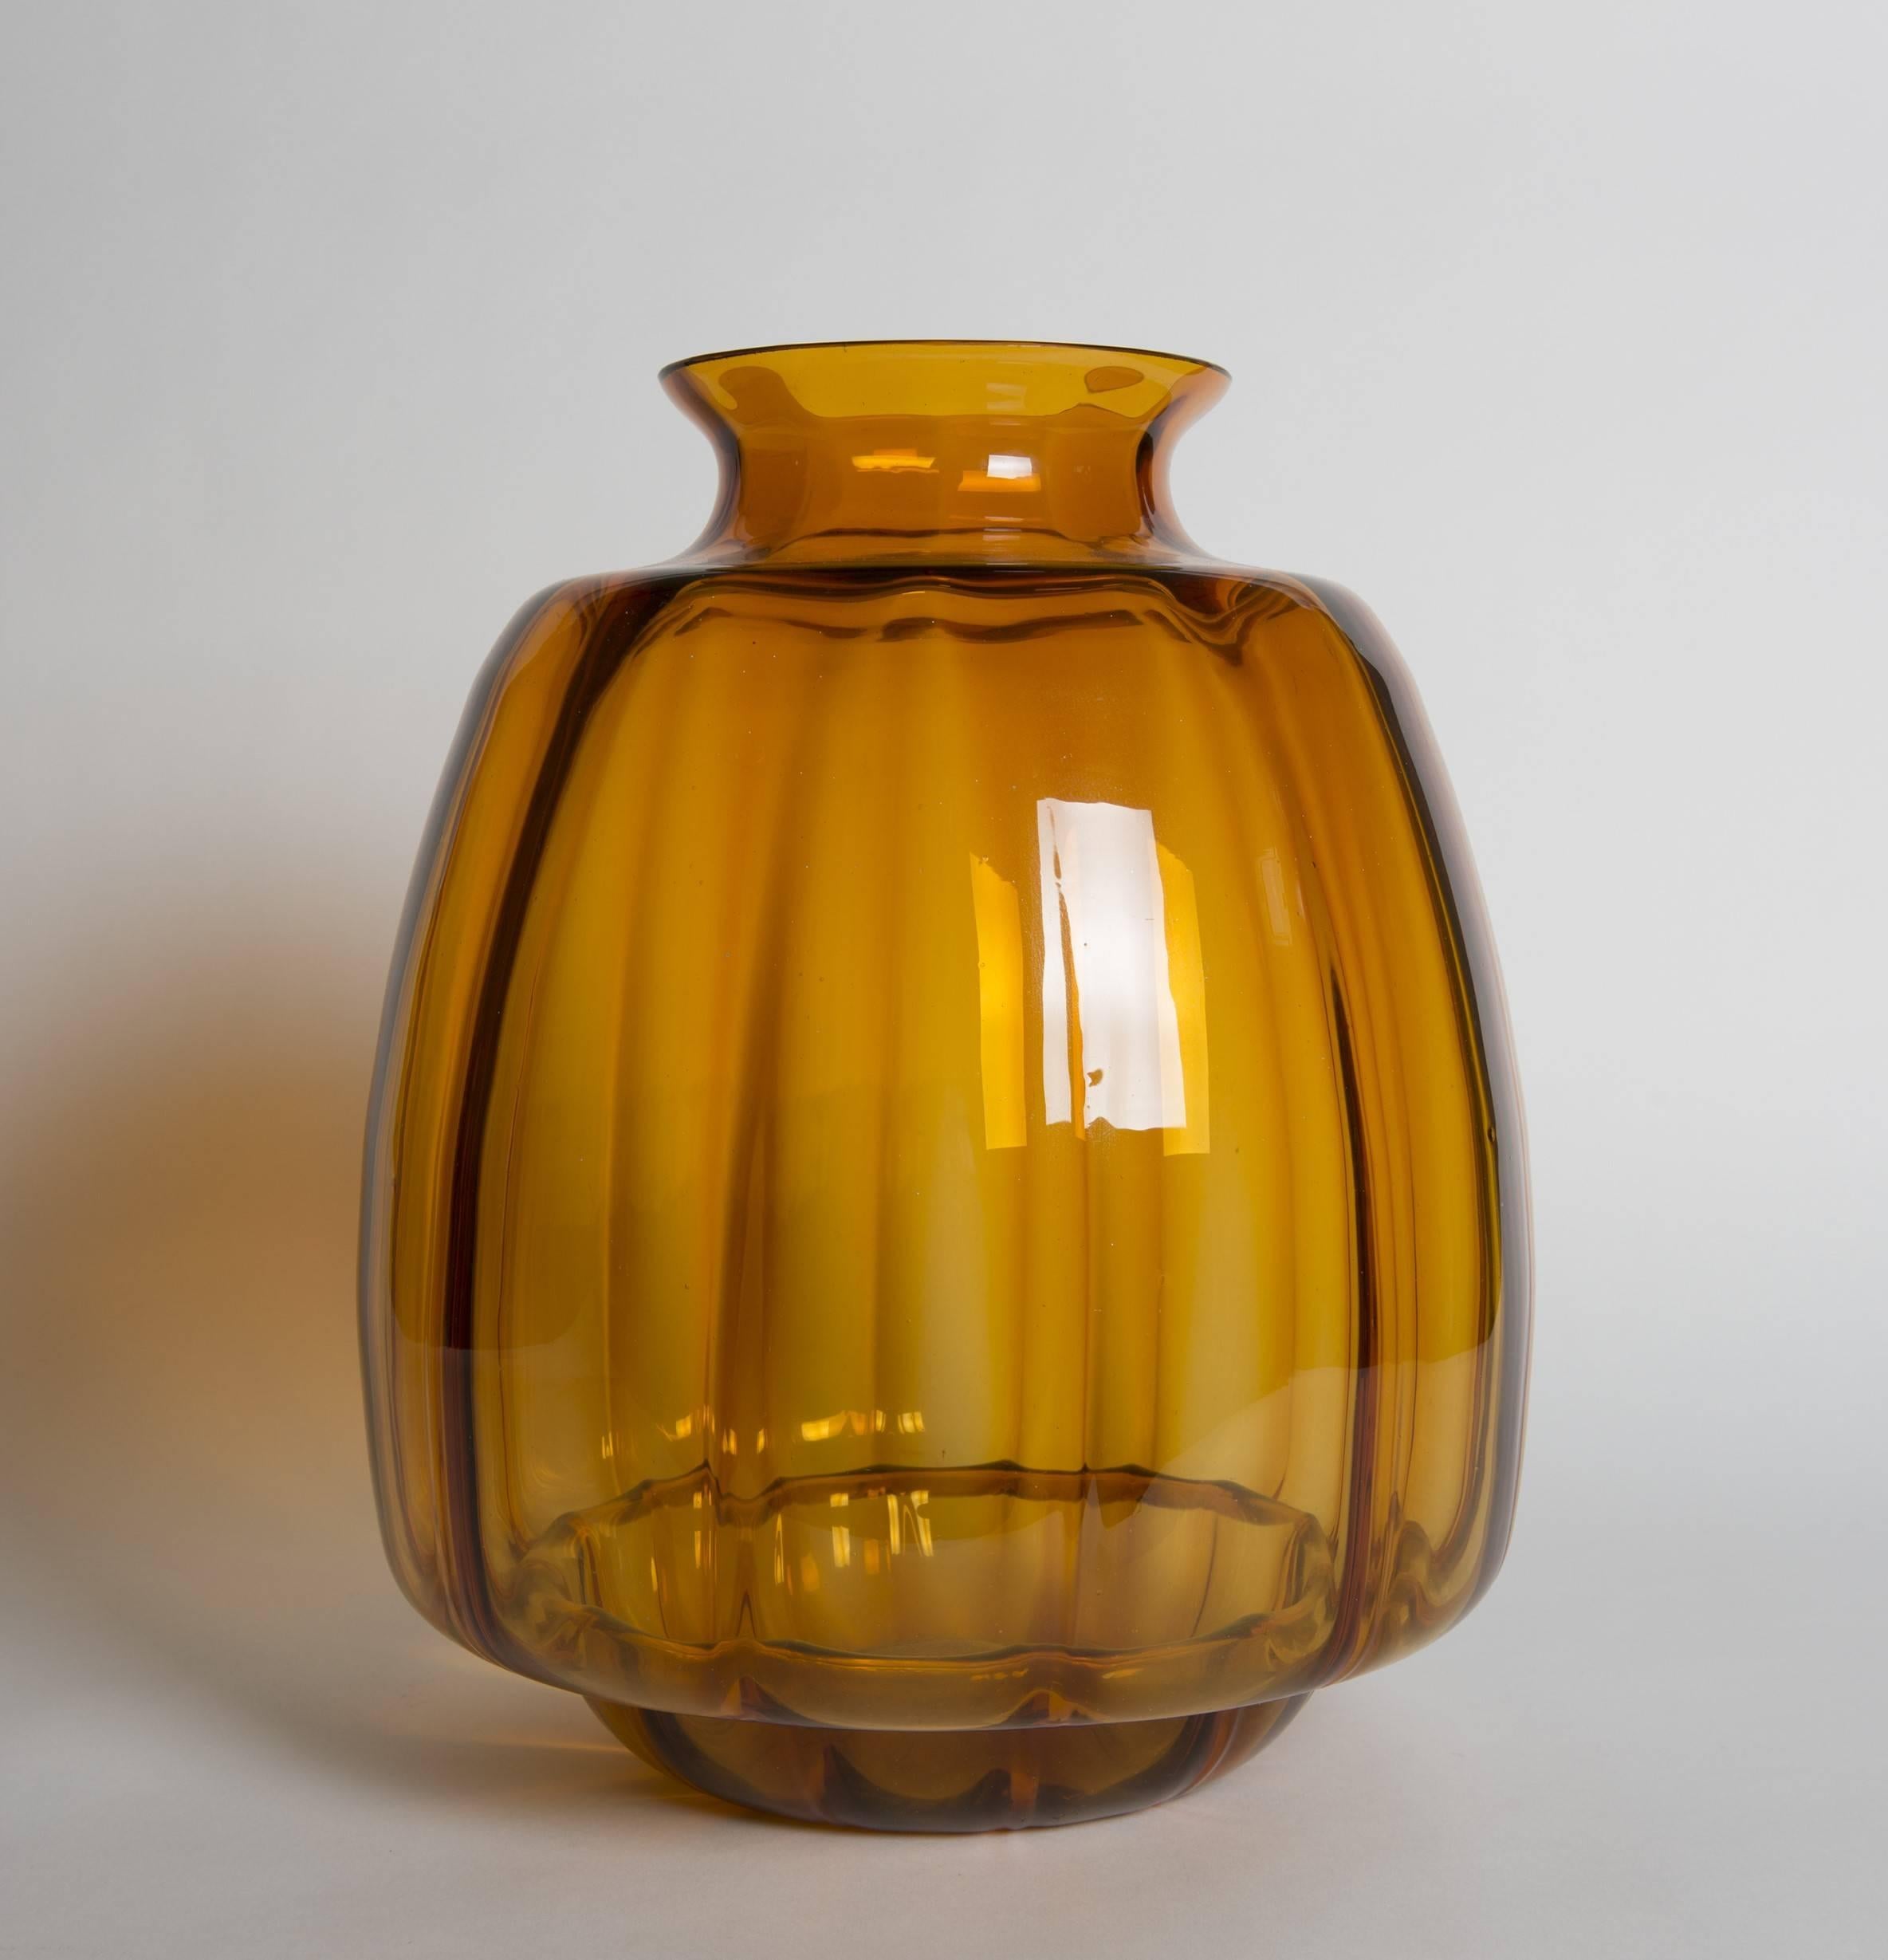 Tall pumpkin shape vase by the Dutch glass designer Andries Dirk (A. D.) Copier (1901-1991) and executed by the Royal Dutch glassworks, Leerdam, The Netherlands. Acid stamped signature (see last image).